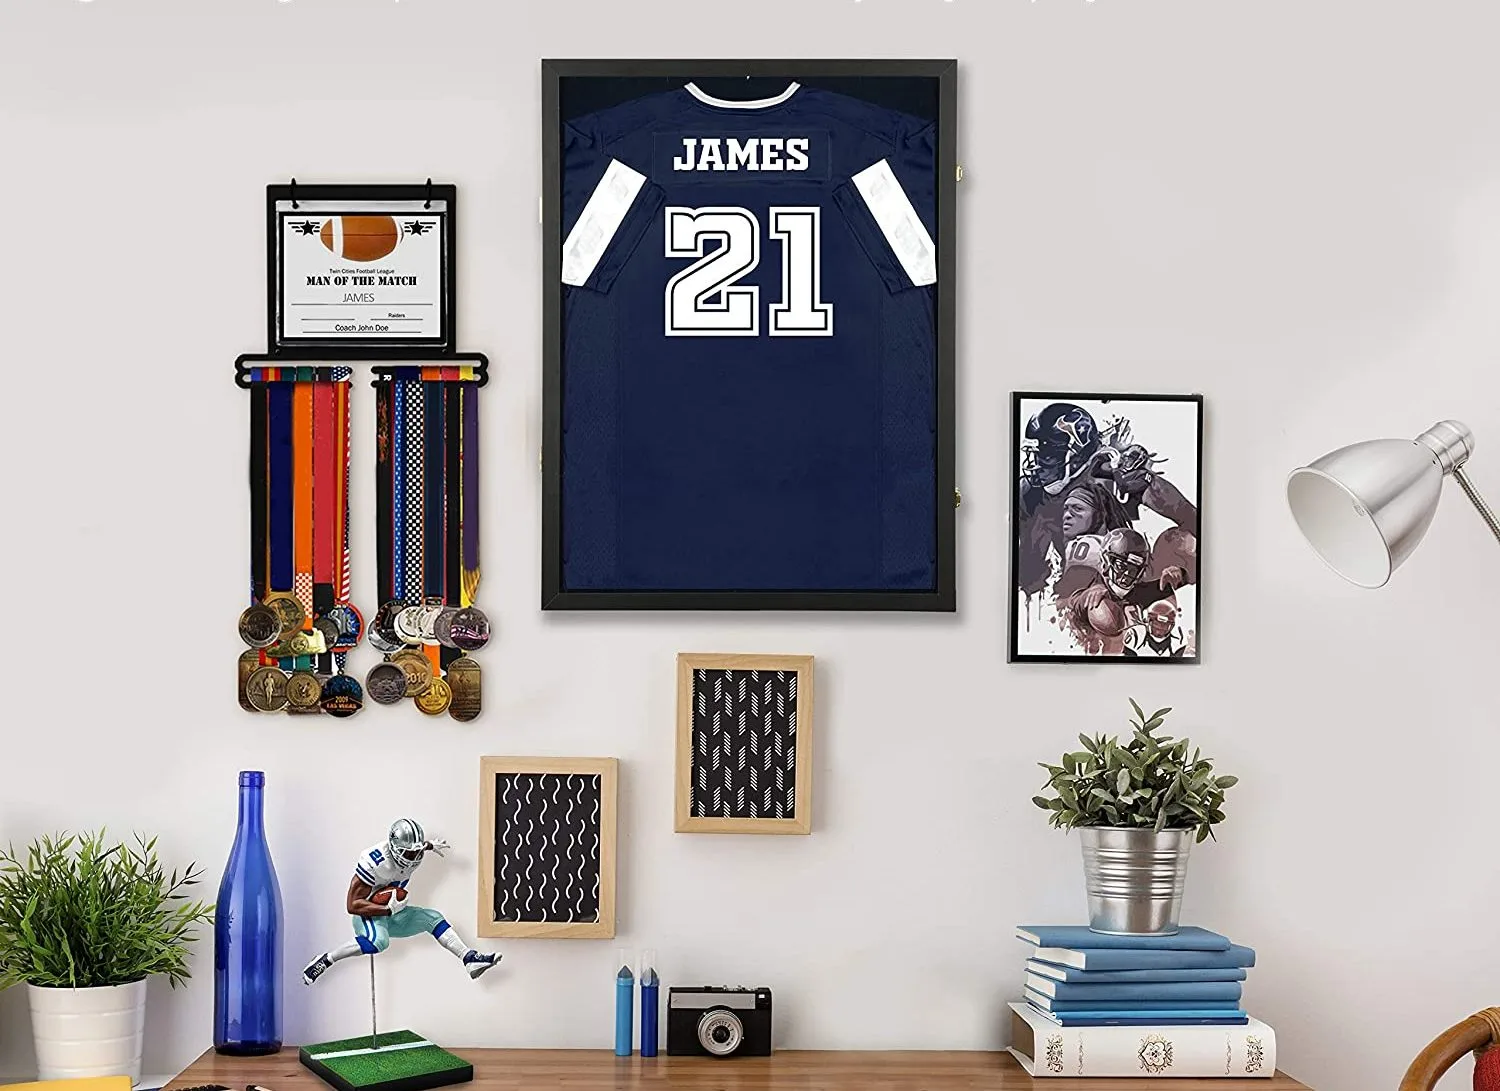 How To Frame A Hockey Jersey At Home